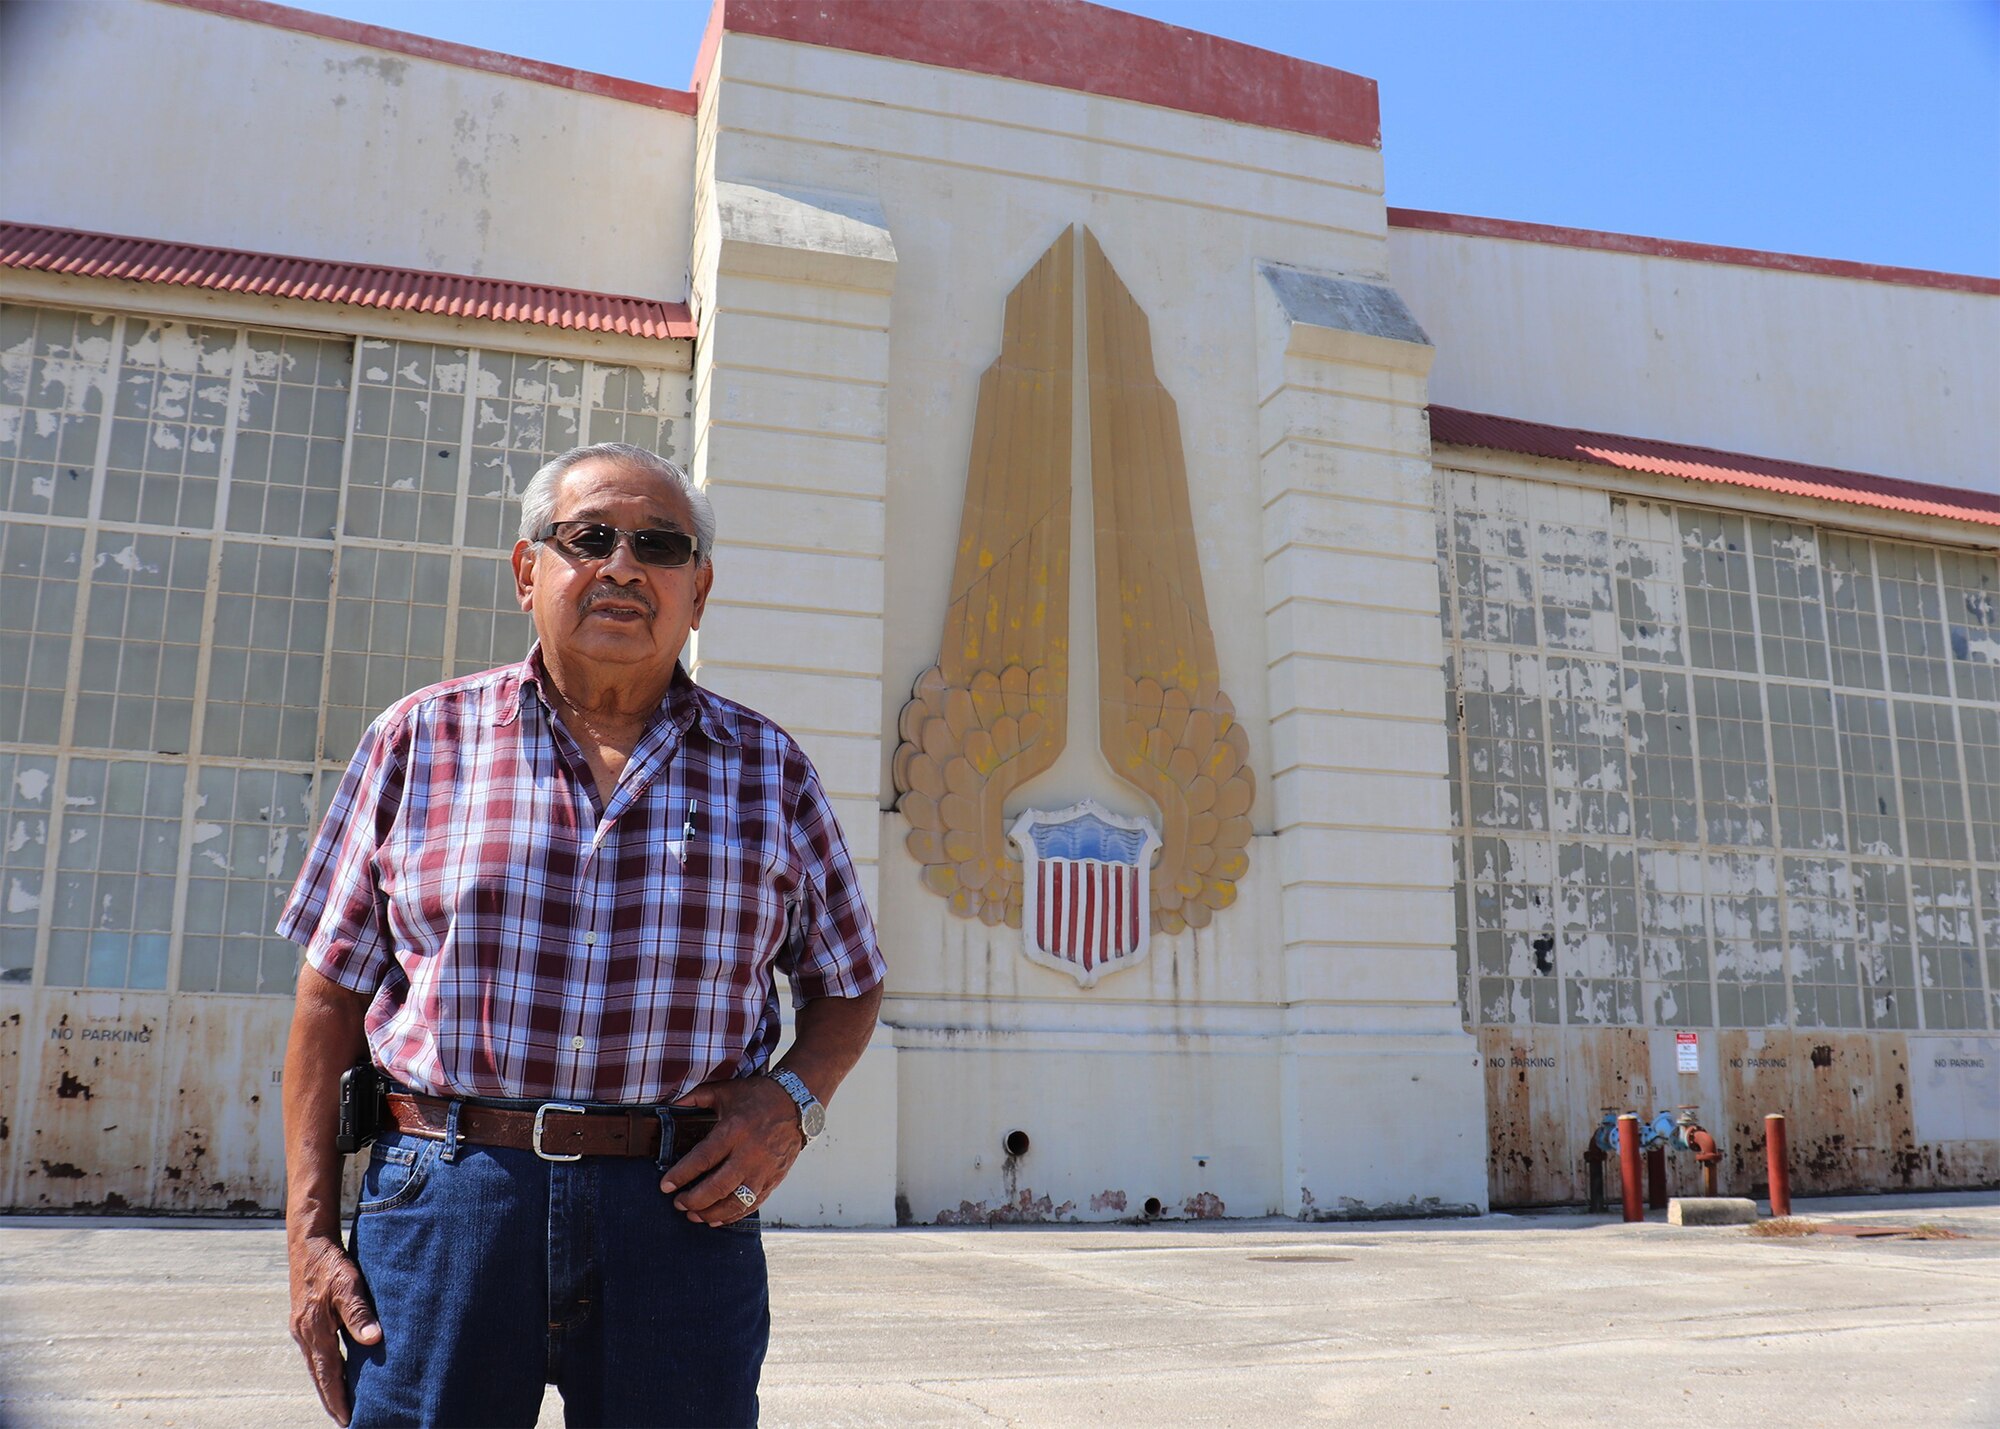 Felix R. Gonzalez, grandfather of Tech. Sgt. Christine R. Narro, 433rd Aerospace Medicine Squadron, optometry technician, visits an old hanger Oct. 10, 2020 on what is now called Kelly Field that once was used for aircraft in depot status at Kelly Air Force Base. Gonzalez recalls his work on the Veterans Monument on Kelly Air Force Base, that was dedicated in May of 1992 to honor service members who served in Operations Desert Shield and Desert Storm. The Monument has since been moved from its original location until a new location is found. (U.S. Air Force photo by Tech. Sgt. Iram Carmona)